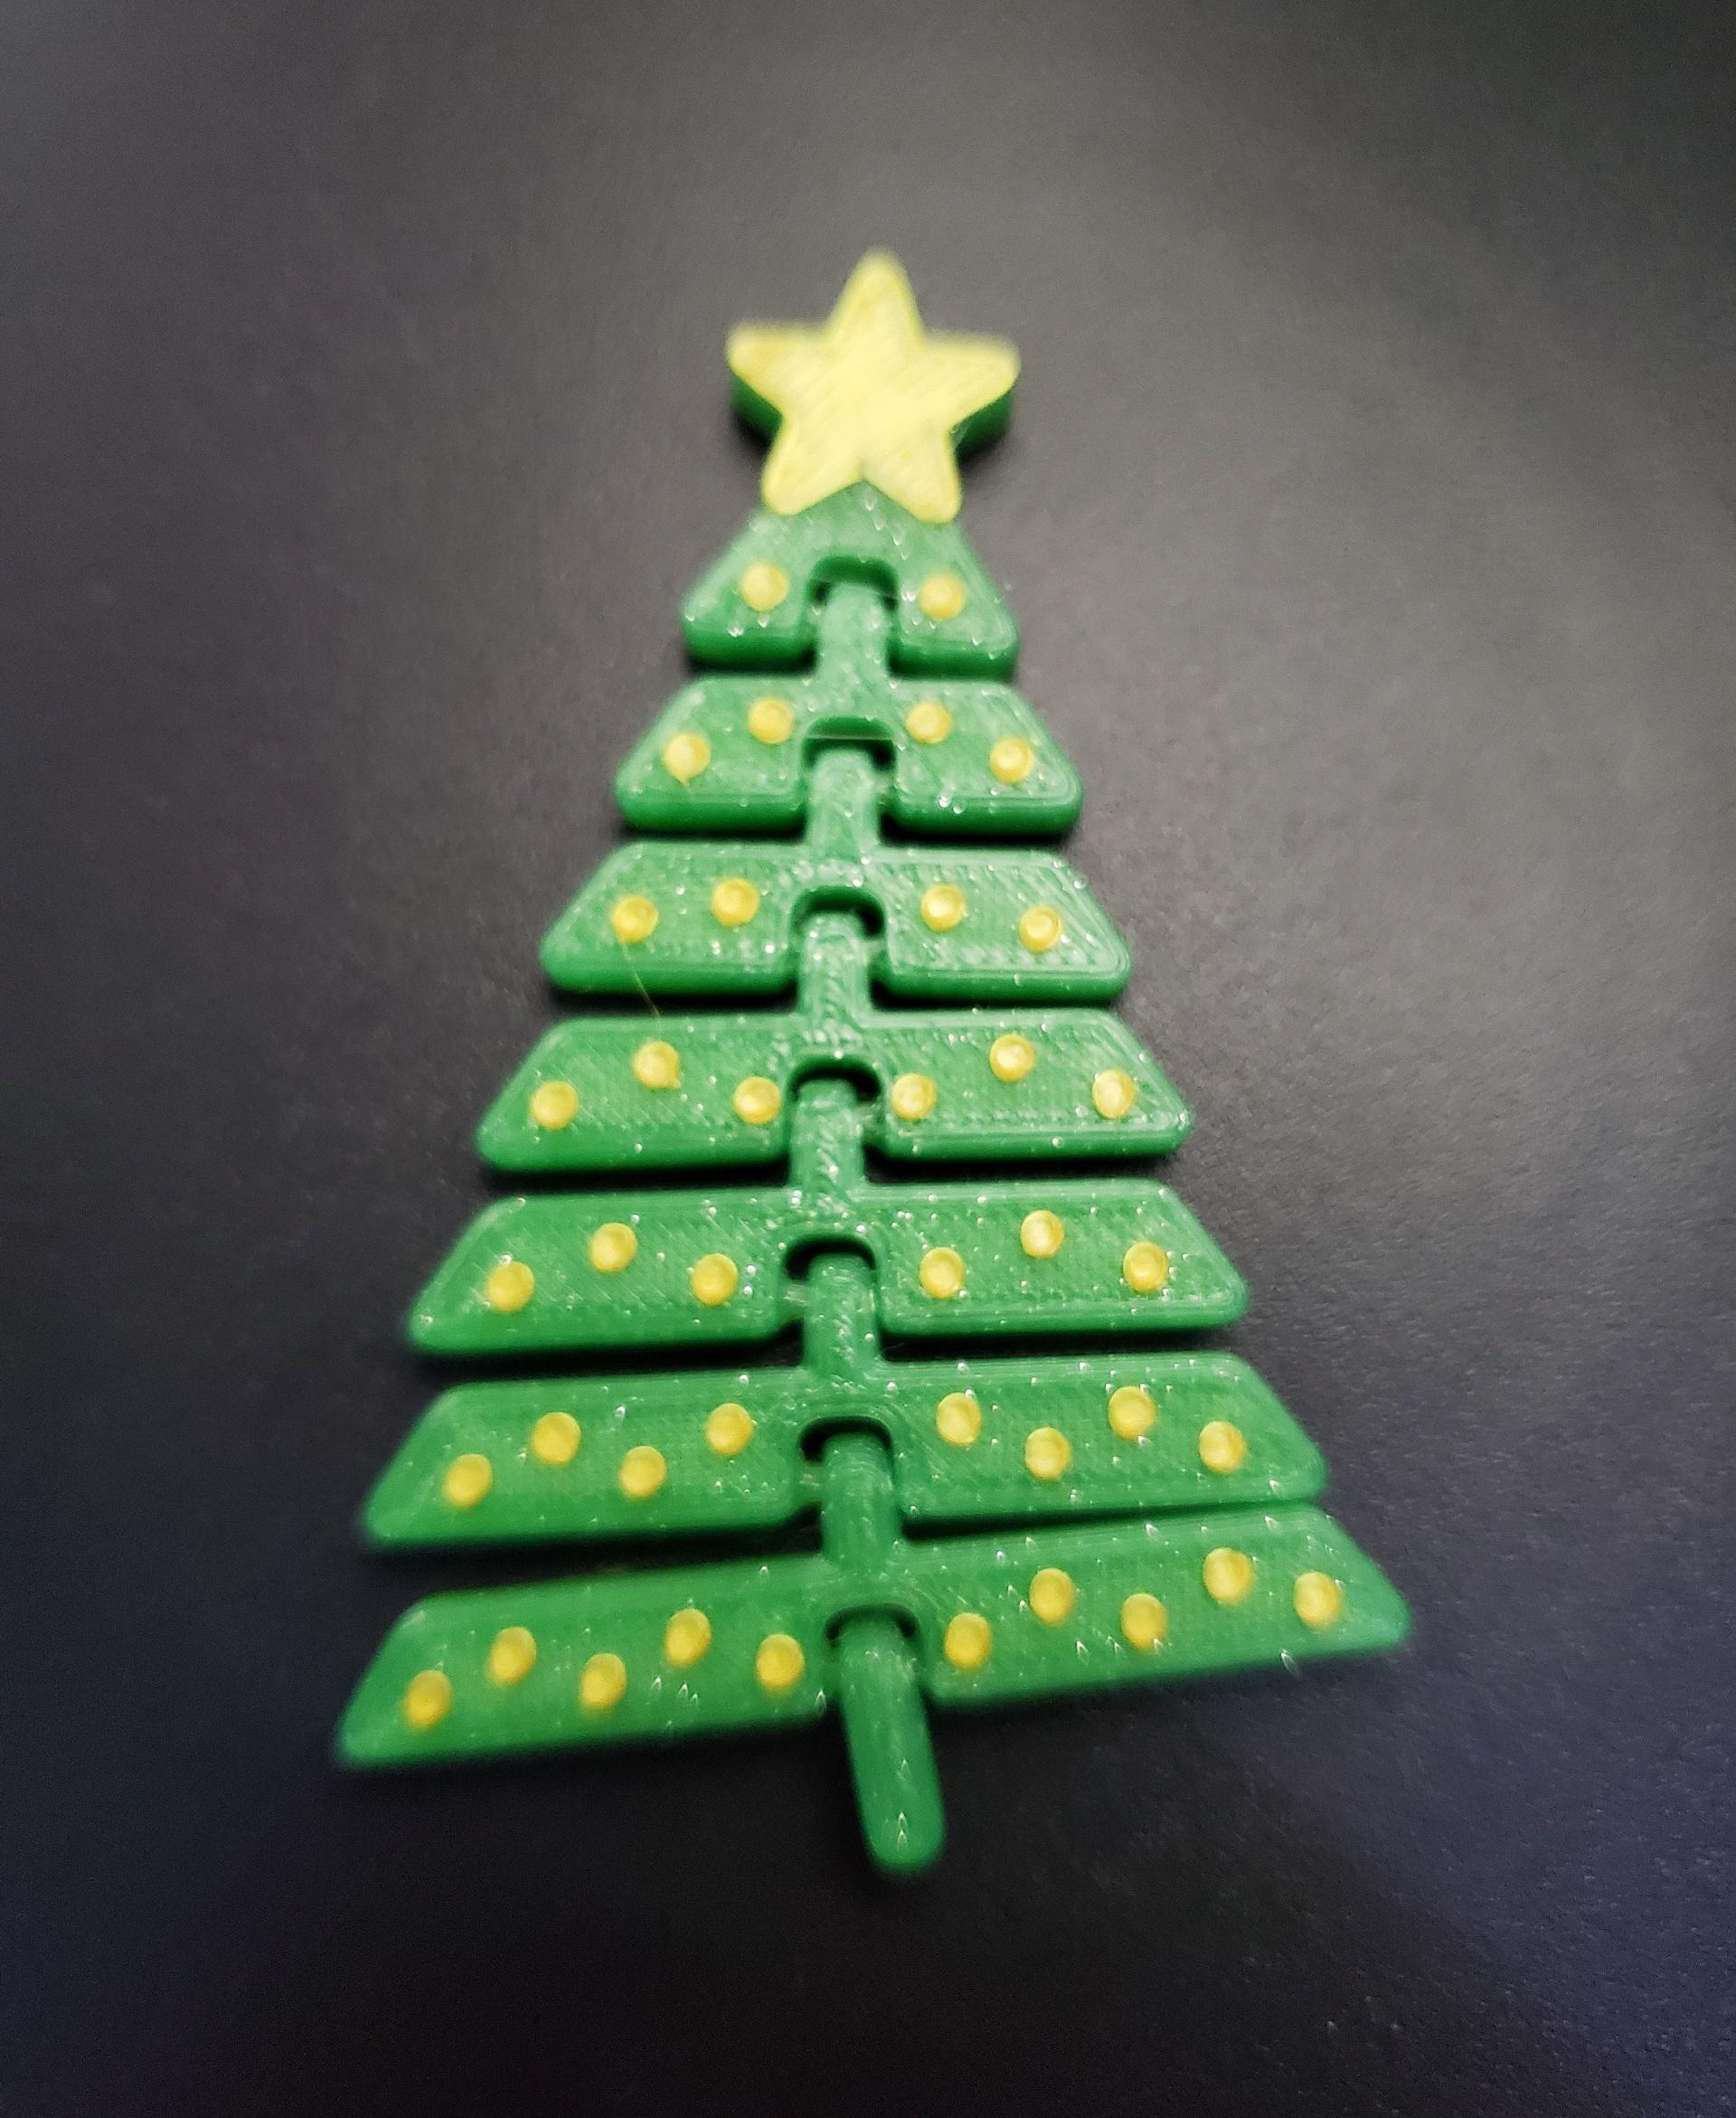 Articulated Christmas Tree with Star and Ornaments - Print in place fidget toys - 3mf - protopasta fleck n forest green - 3d model